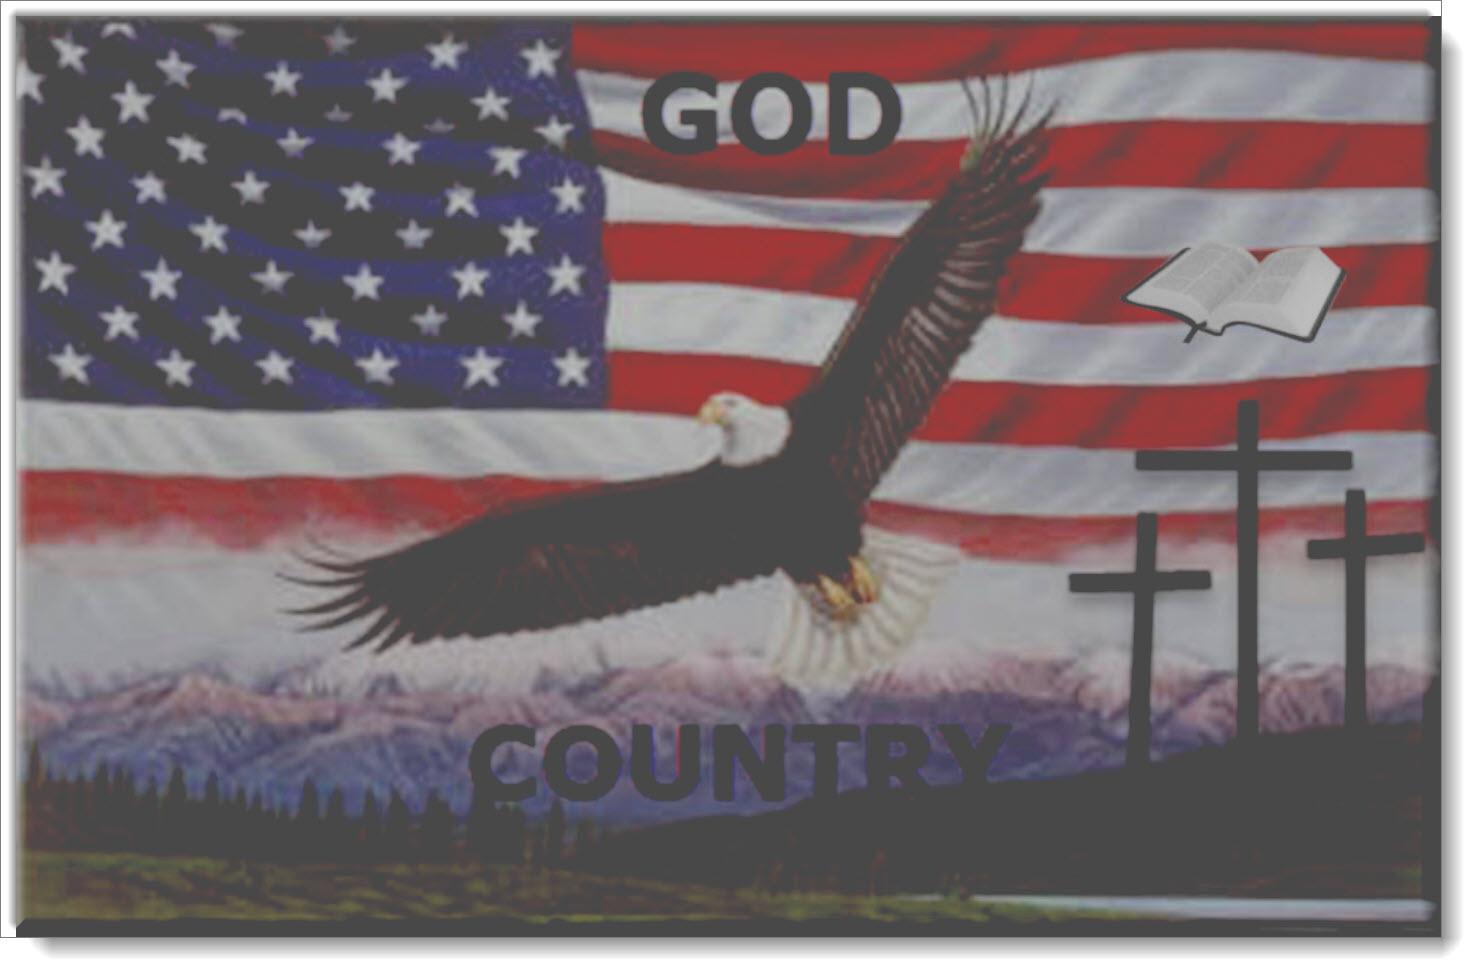 Freedom, Liberty, The Bible, Body of Christ, and Country